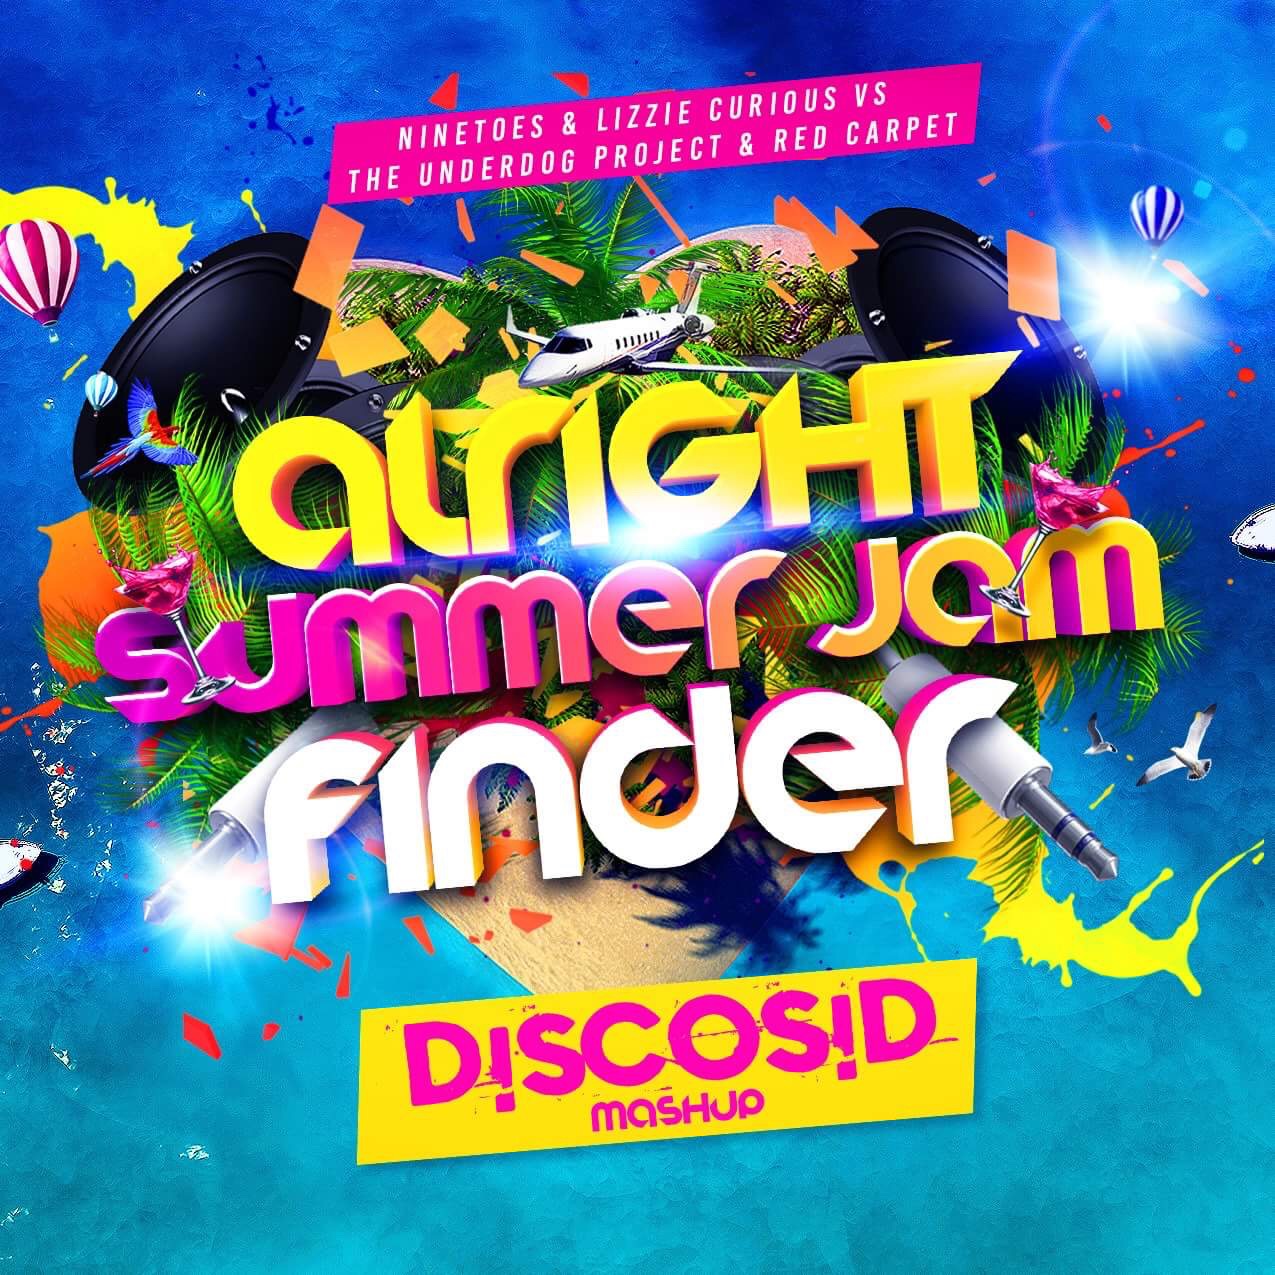 Ninetoes & Lizzie Curious vs The Underdog Project & Red Carpet - Alright Summer Jam Finder (Discosid Mashup) [VDJ Giles Barr Video Edit]